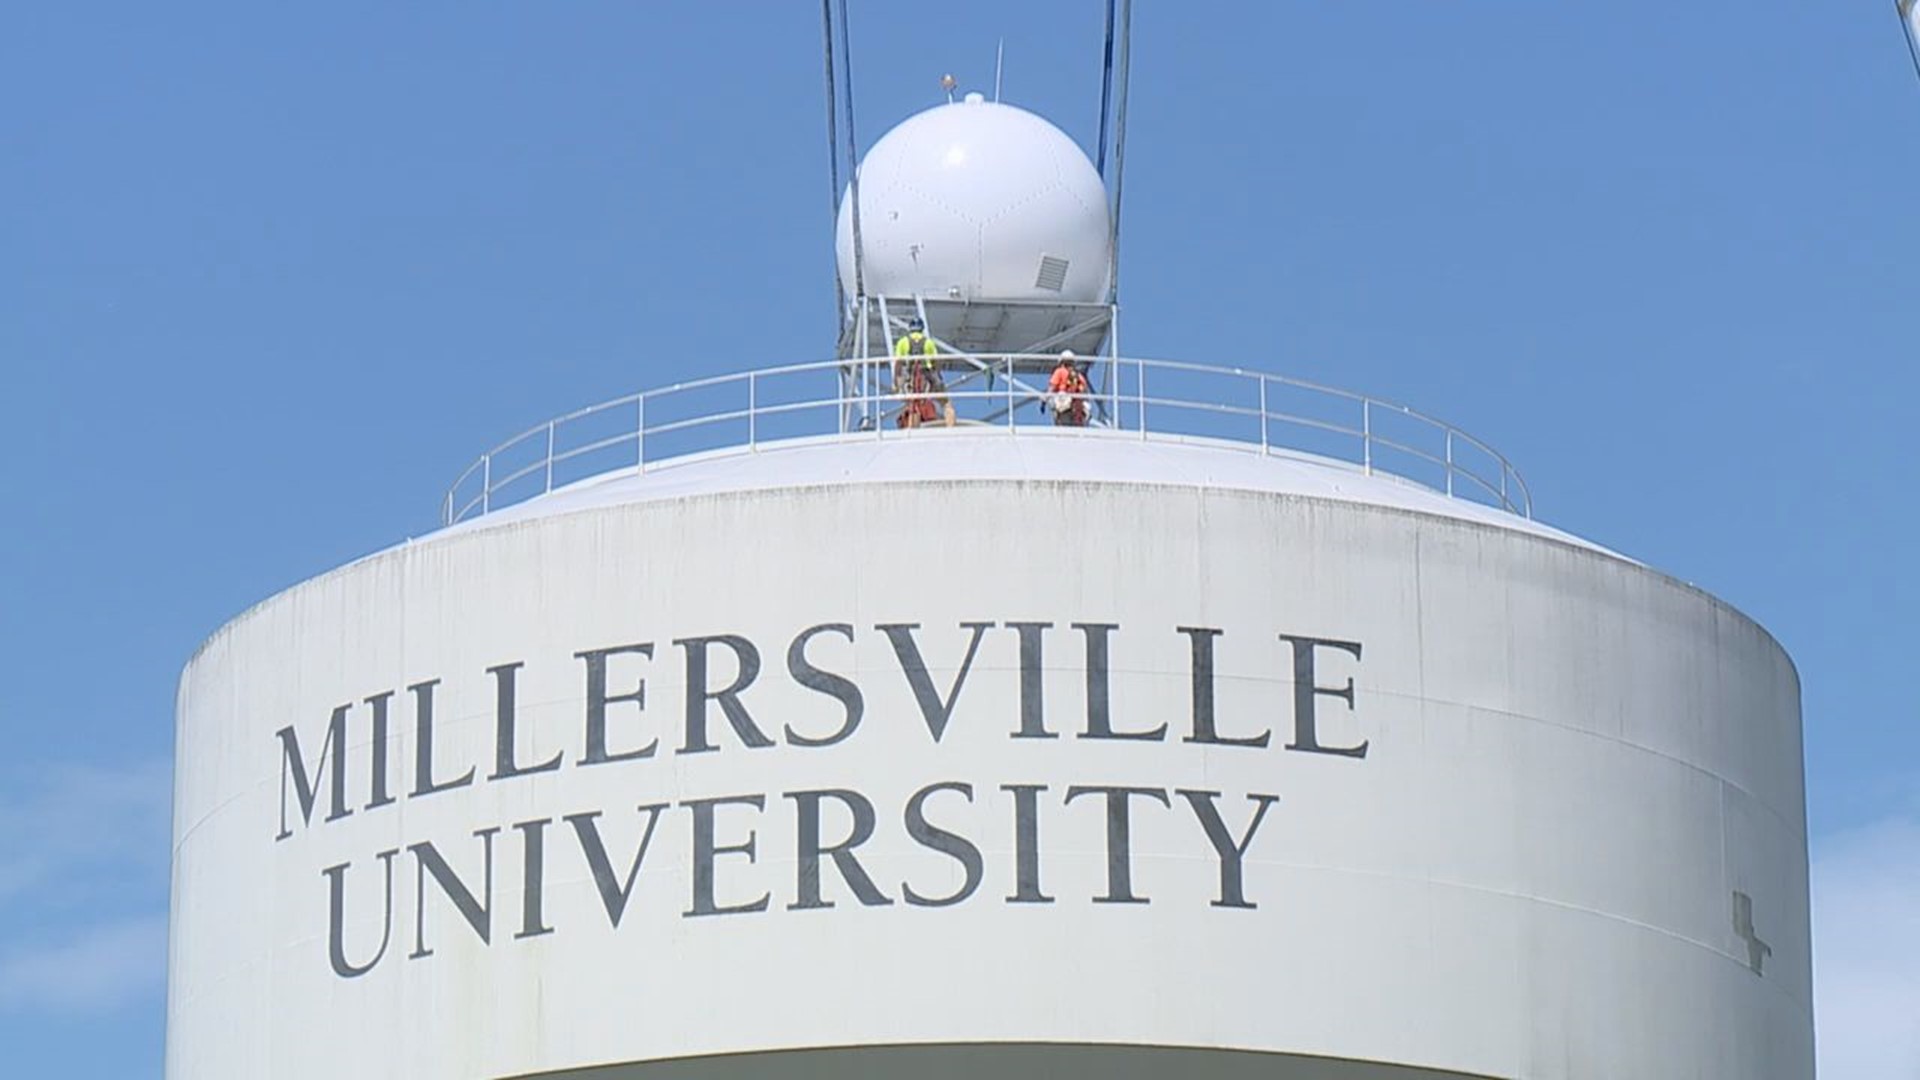 The university partnered with Climavision to install the radar in an effort to better understand and forecast weather events in South Central Pennsylvania.